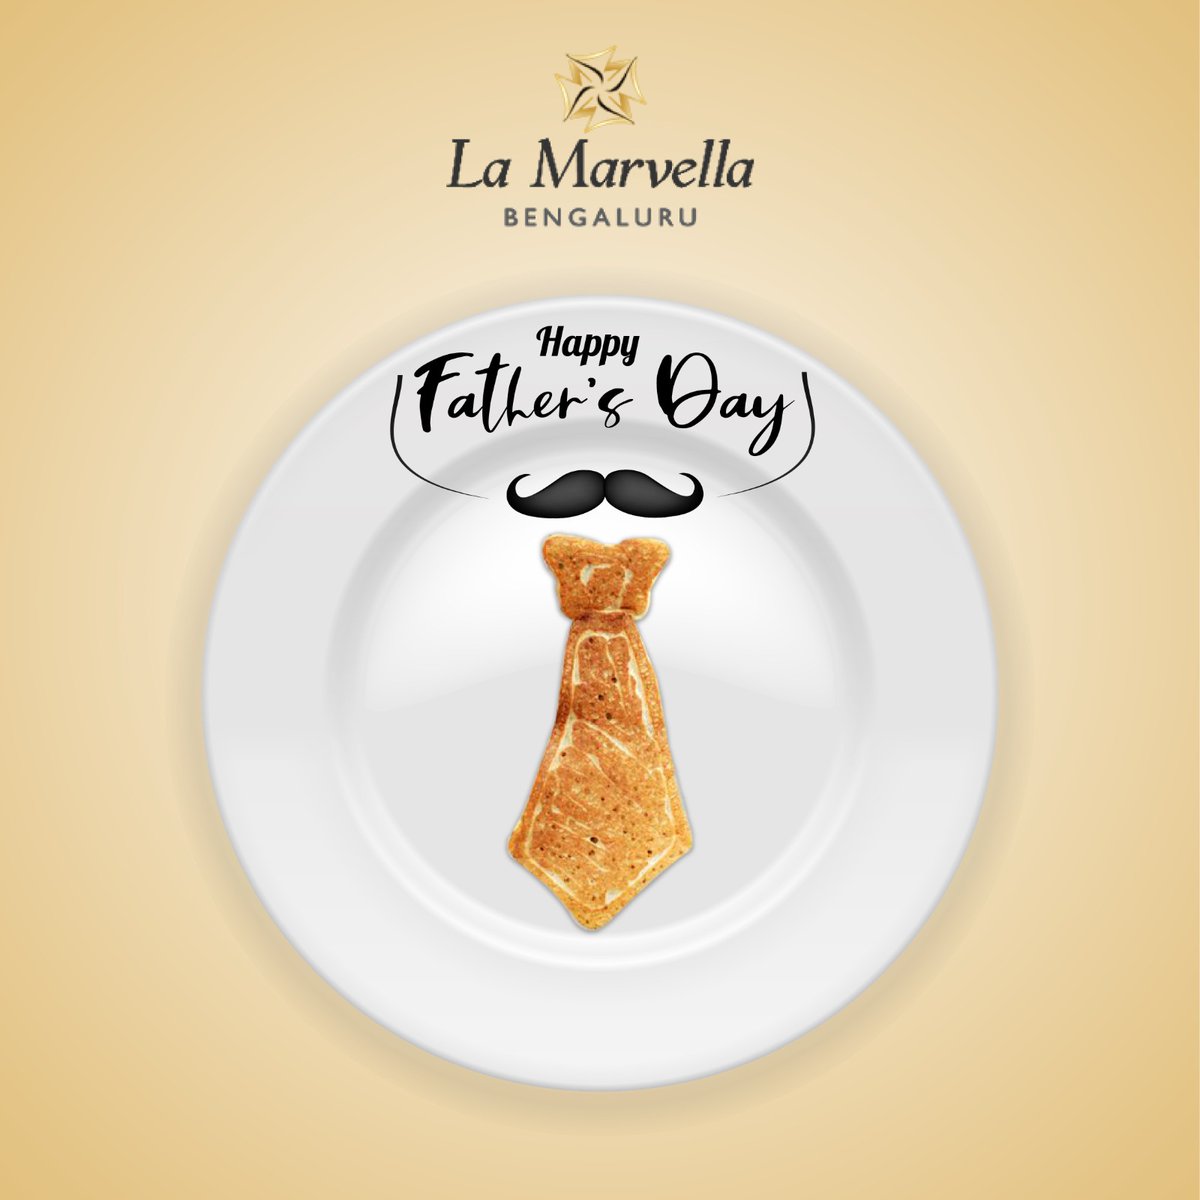 Wishing you a day filled with laughter and cherished memories. Come dine with @Lamarvella to make this day even more special.

#HappyFathersday #Fathersday #goldenoak #food  #lamarvella #bangalore #bangaloredays #bangaloreblogger #bangaloreevents #bangalorevenue #bangalorehotel